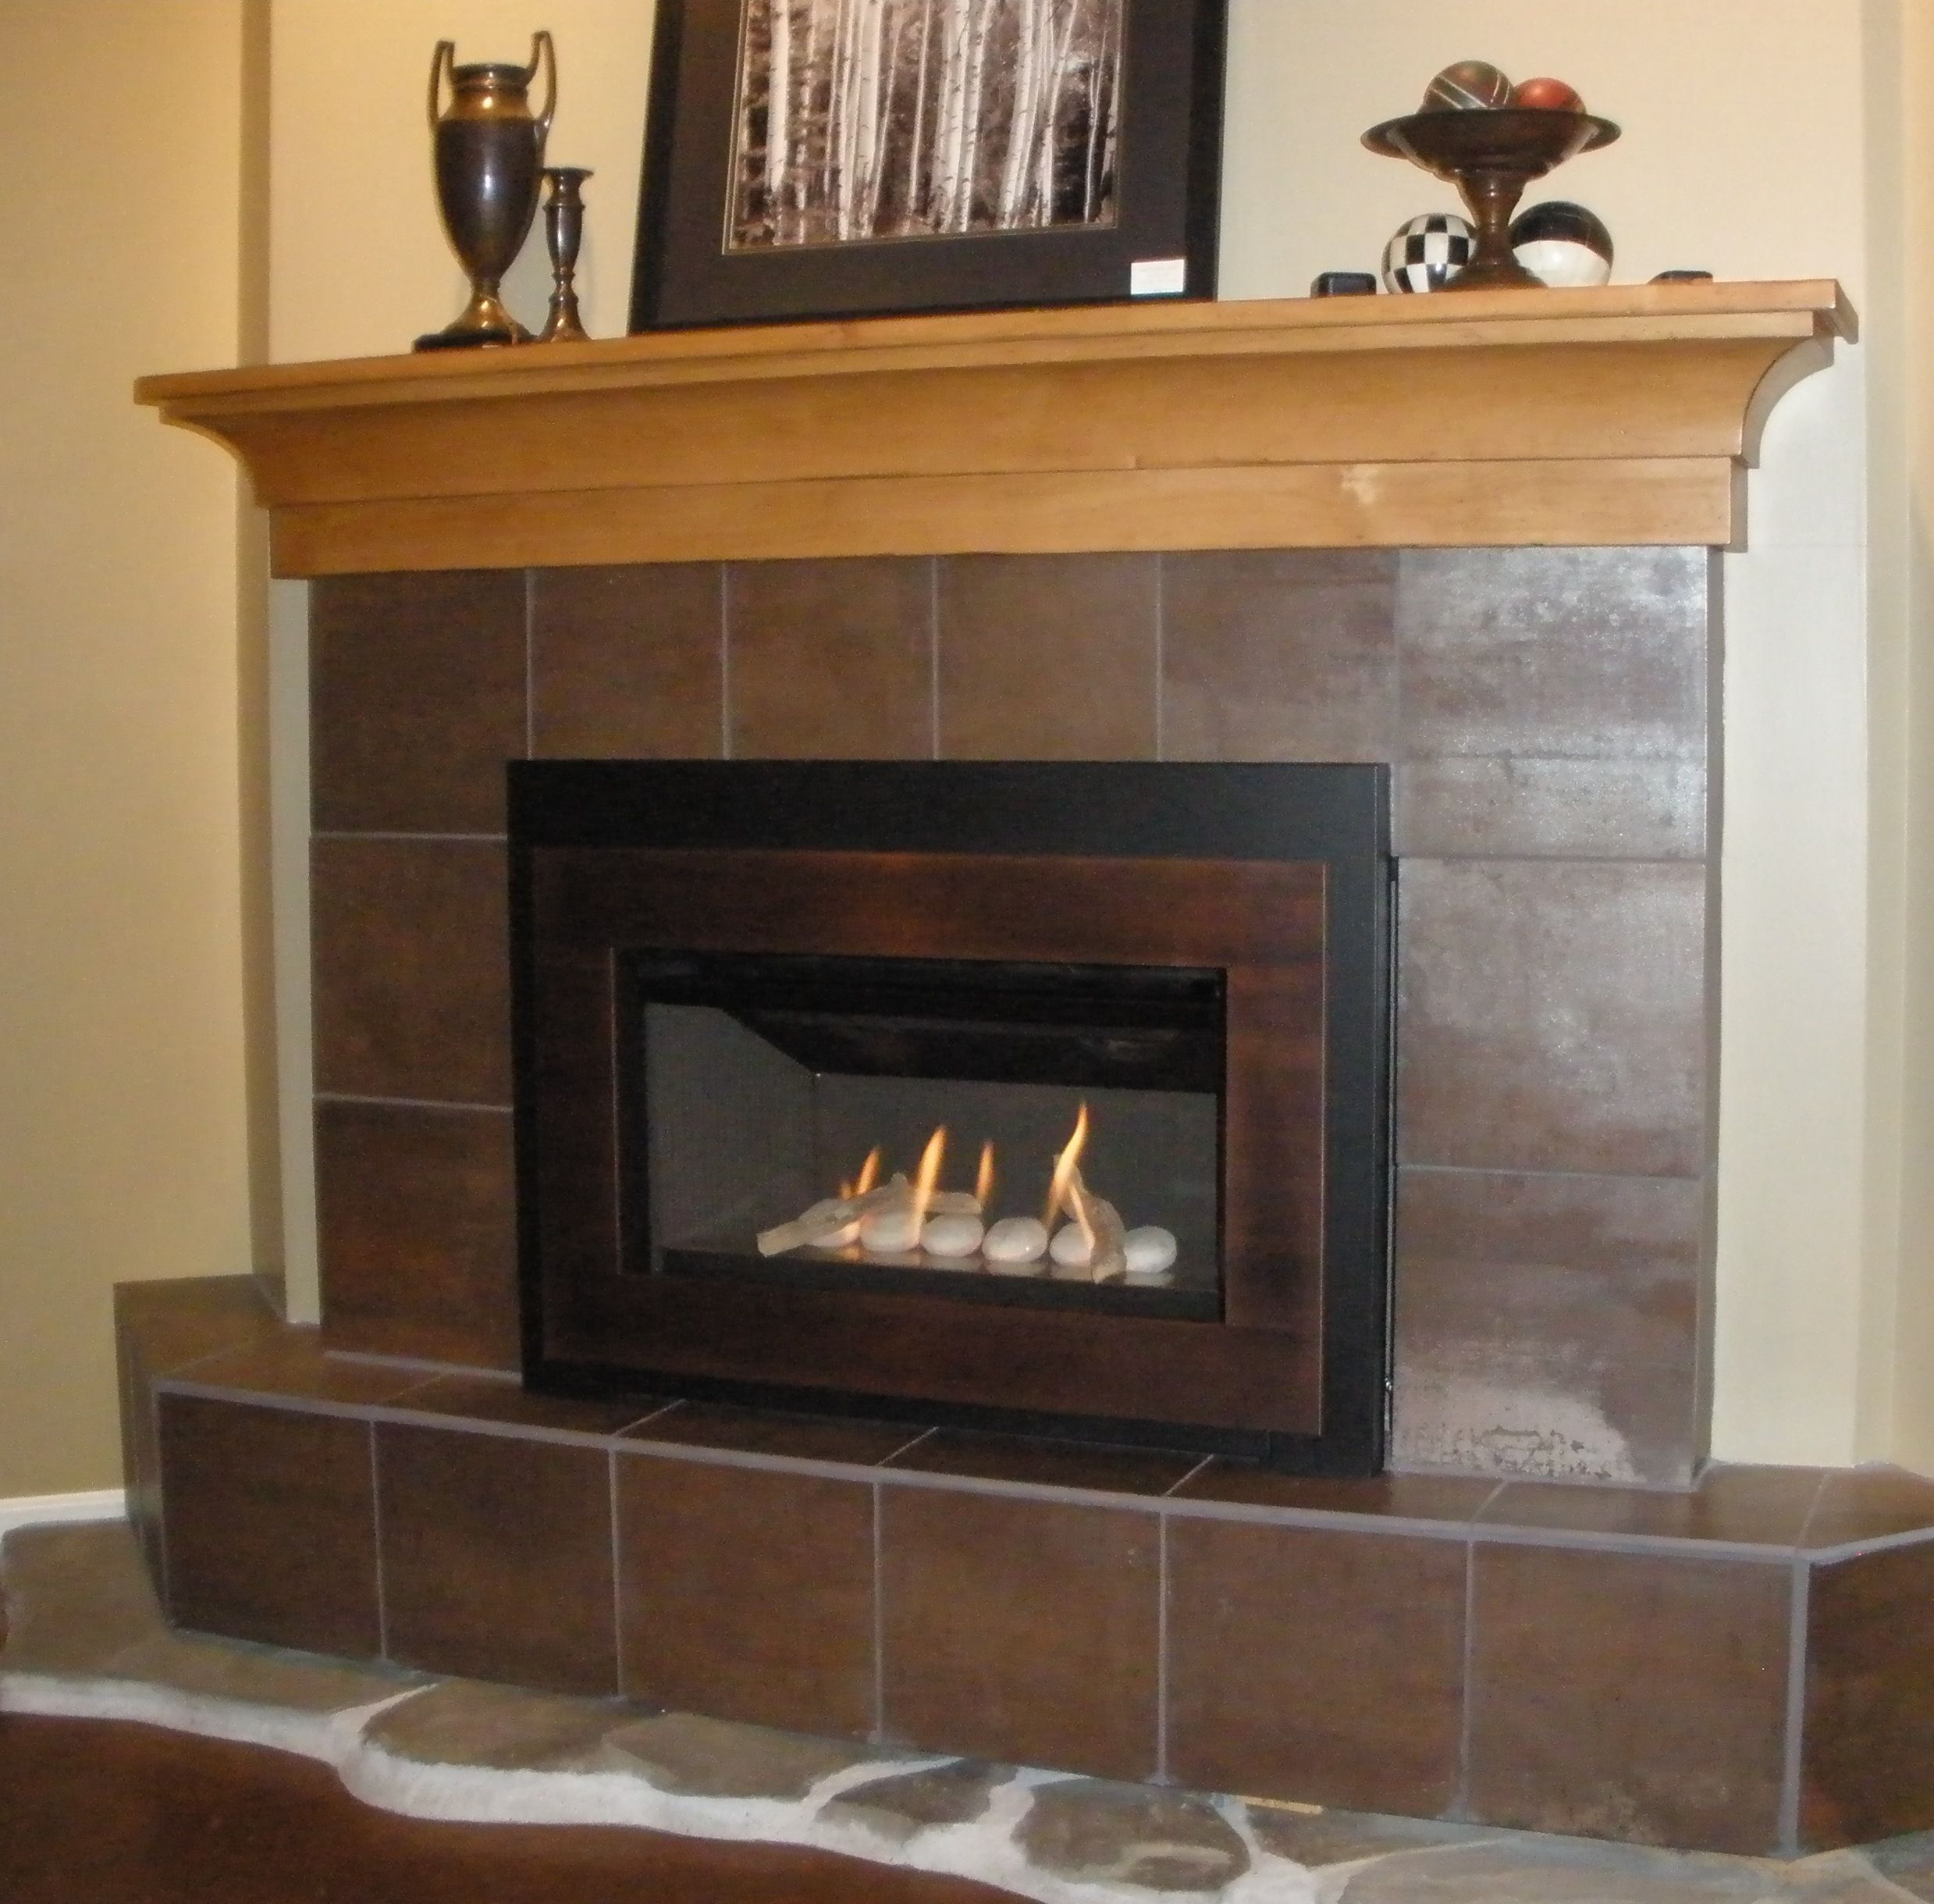 Fireplace Ideas without Fire Best Of Pin On Valor Radiant Gas Fireplaces Midwest Dealer